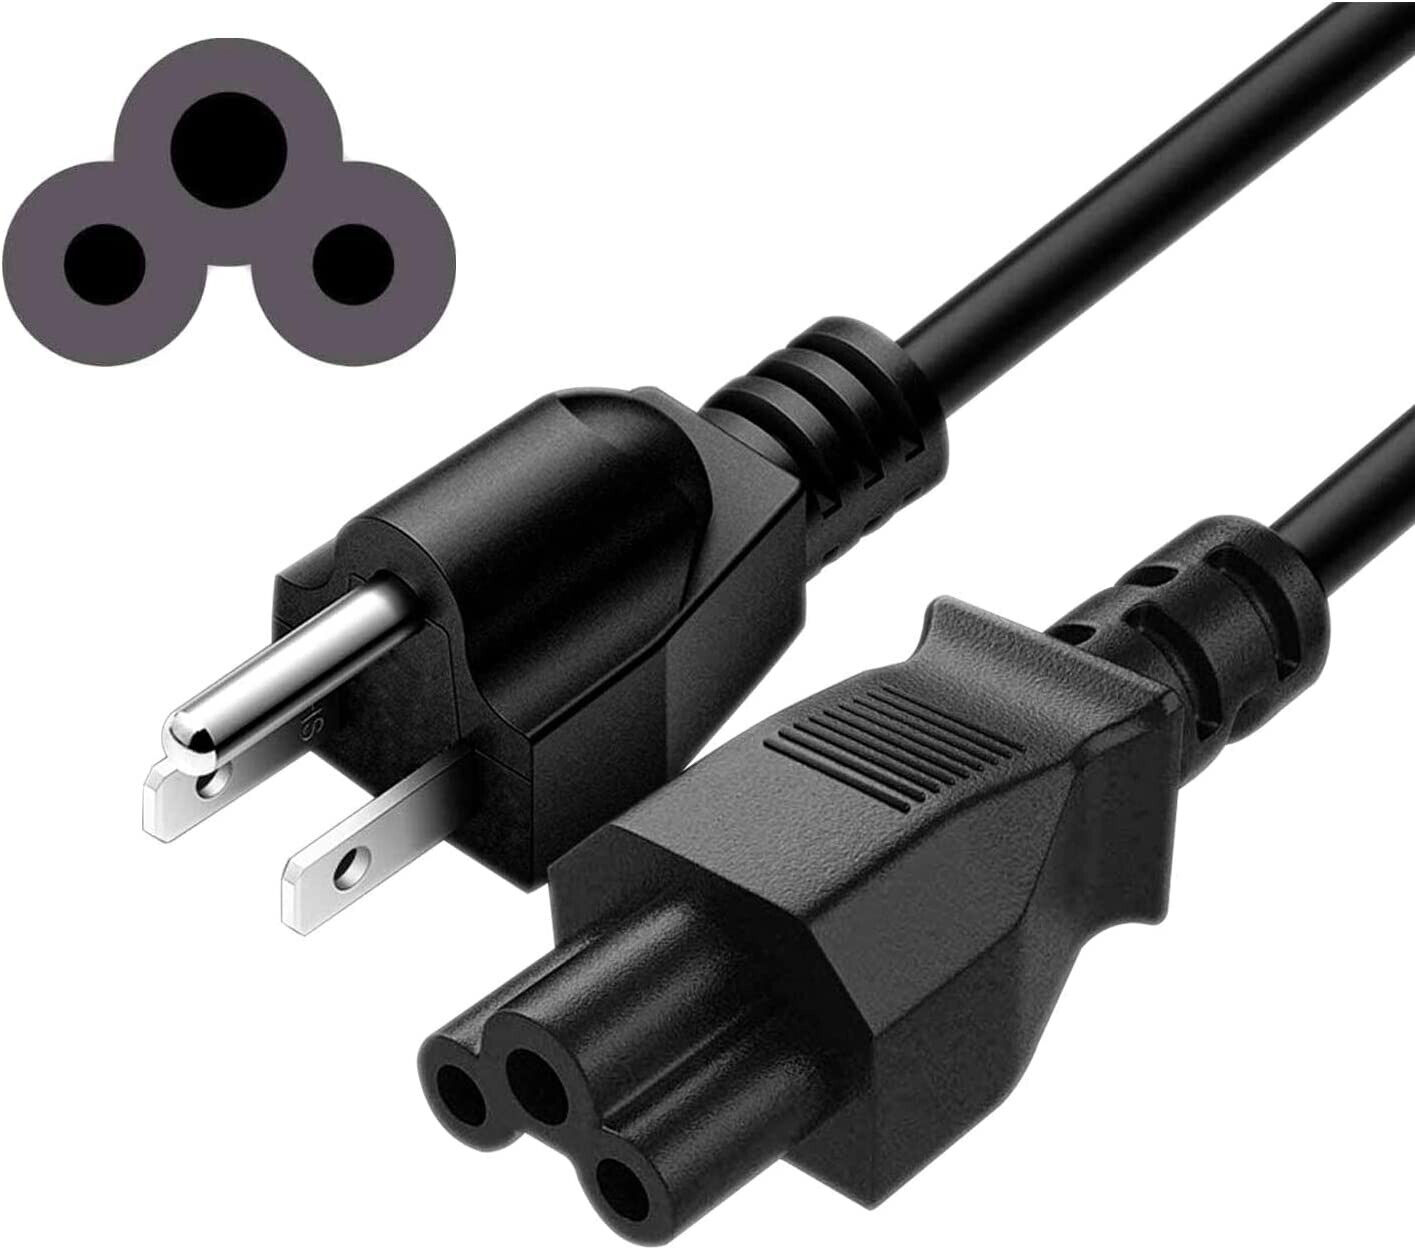 Standard 6ft 3 Prong AKA Mickey Mouse AC Power Cord for PS2 PS3 Laptop PC 18 AWG